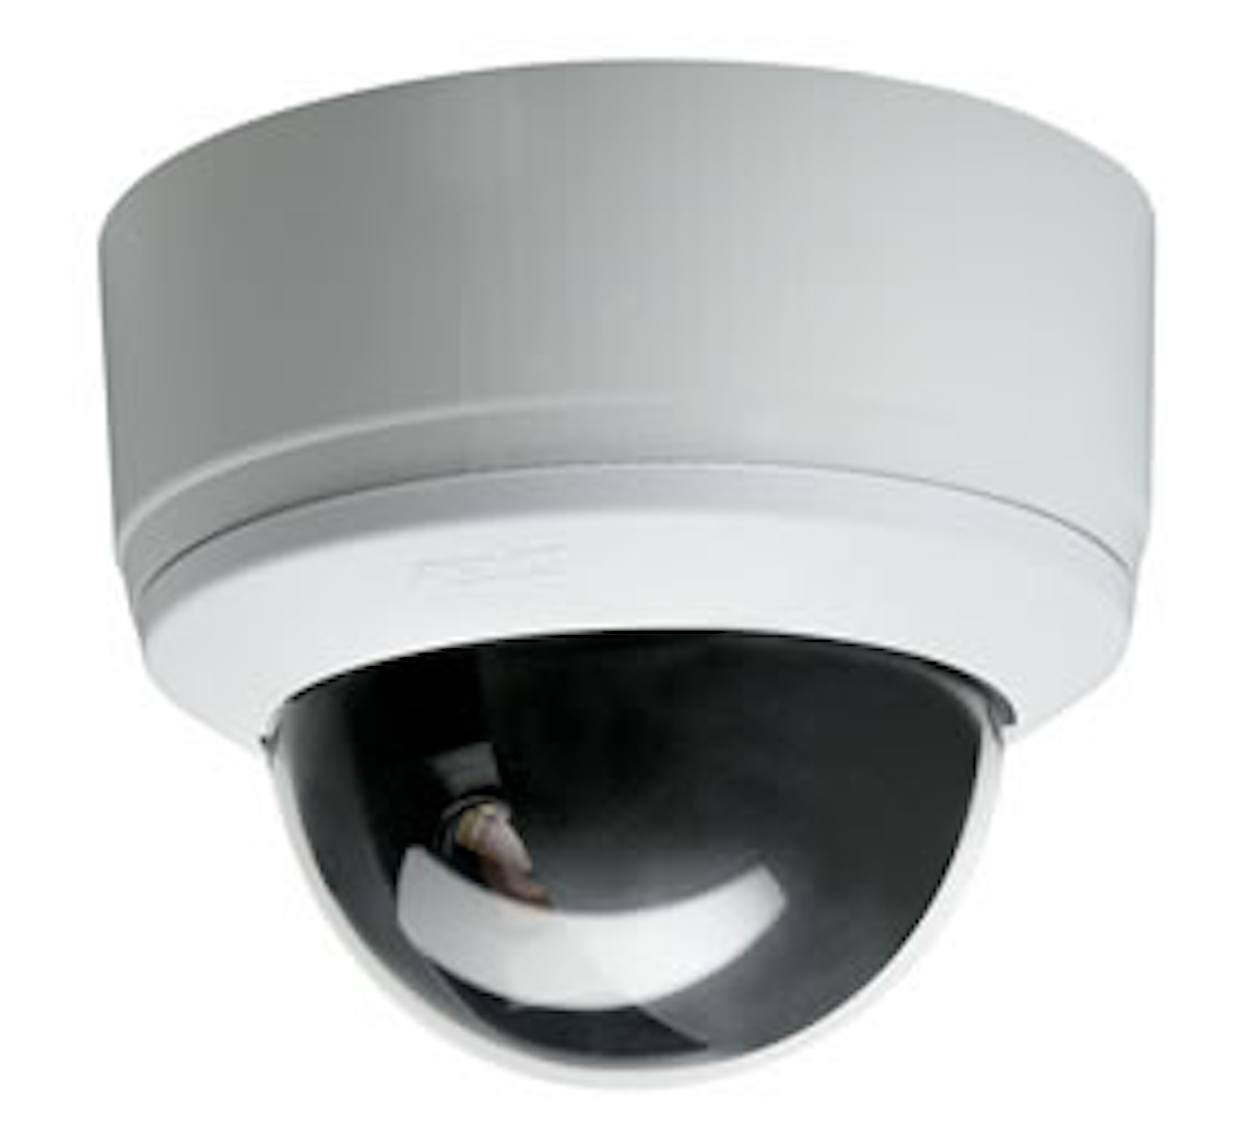 Pelco Introduces New Compact Camera Dome | Security Info Watch